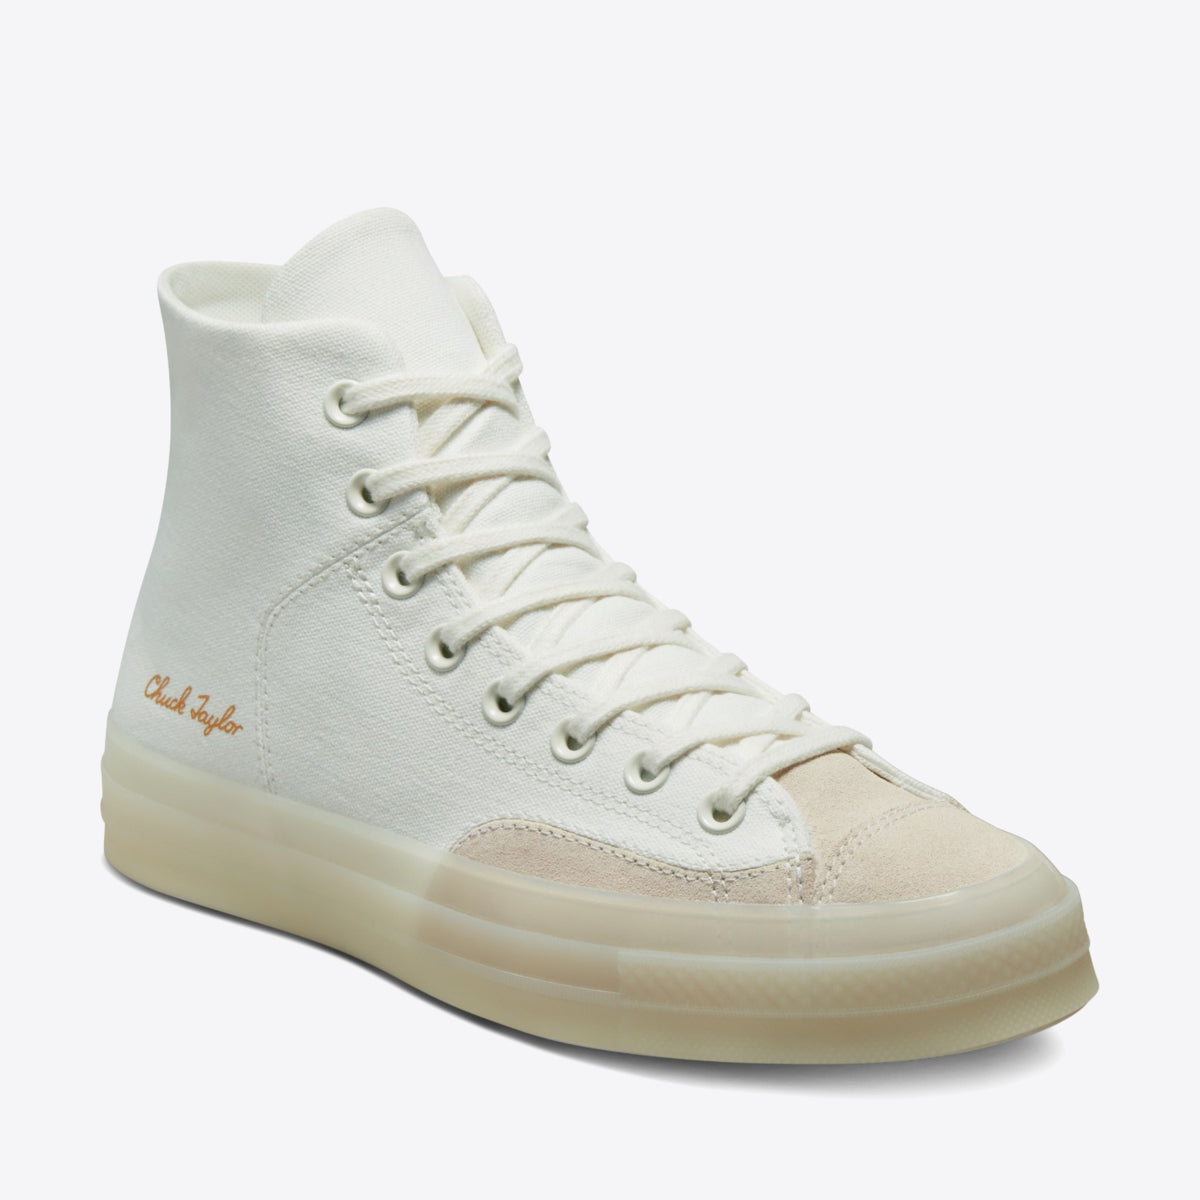 CONVERSE Chuck Taylor 70 Marquis High Vintage White - Image 8